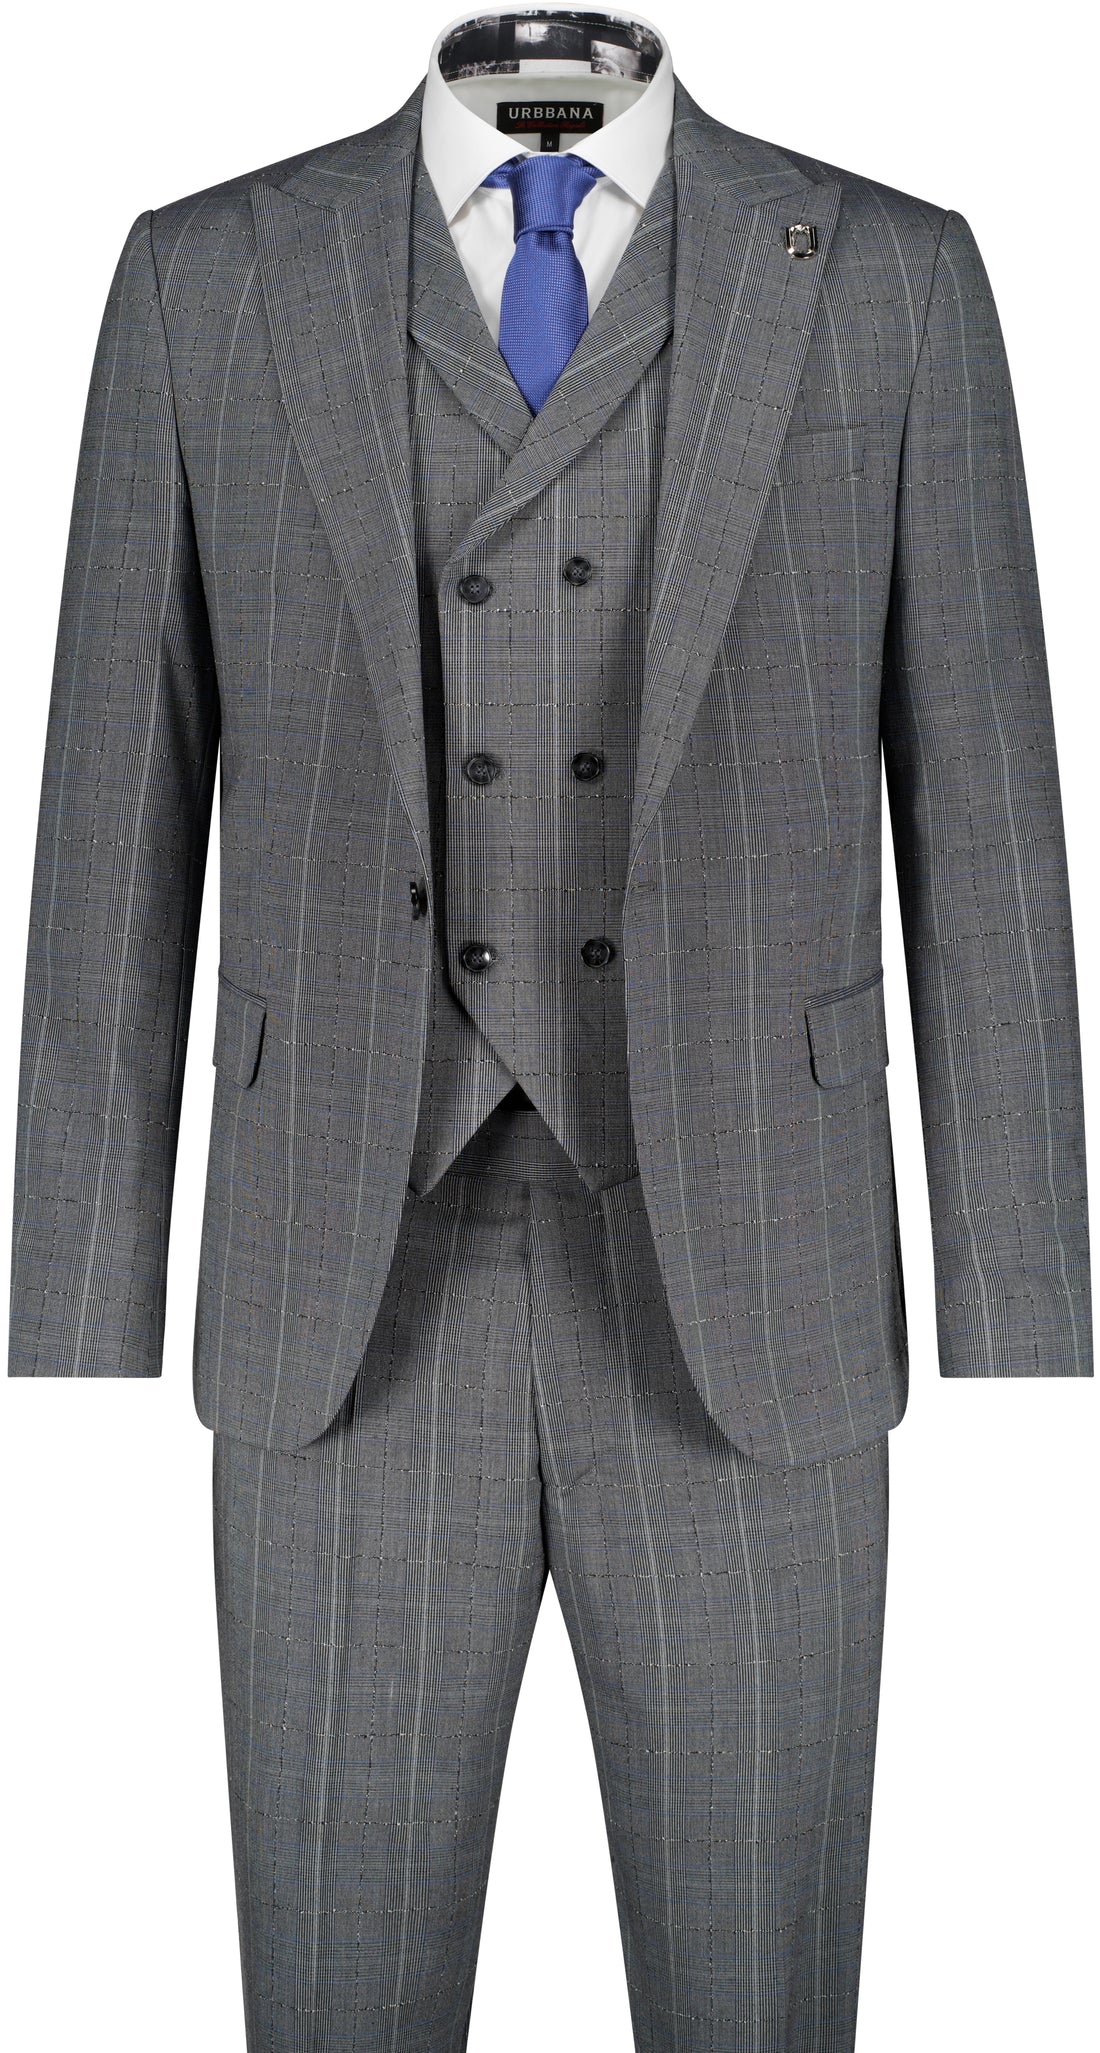 The Zanetti Suit - Suit by Urbbana